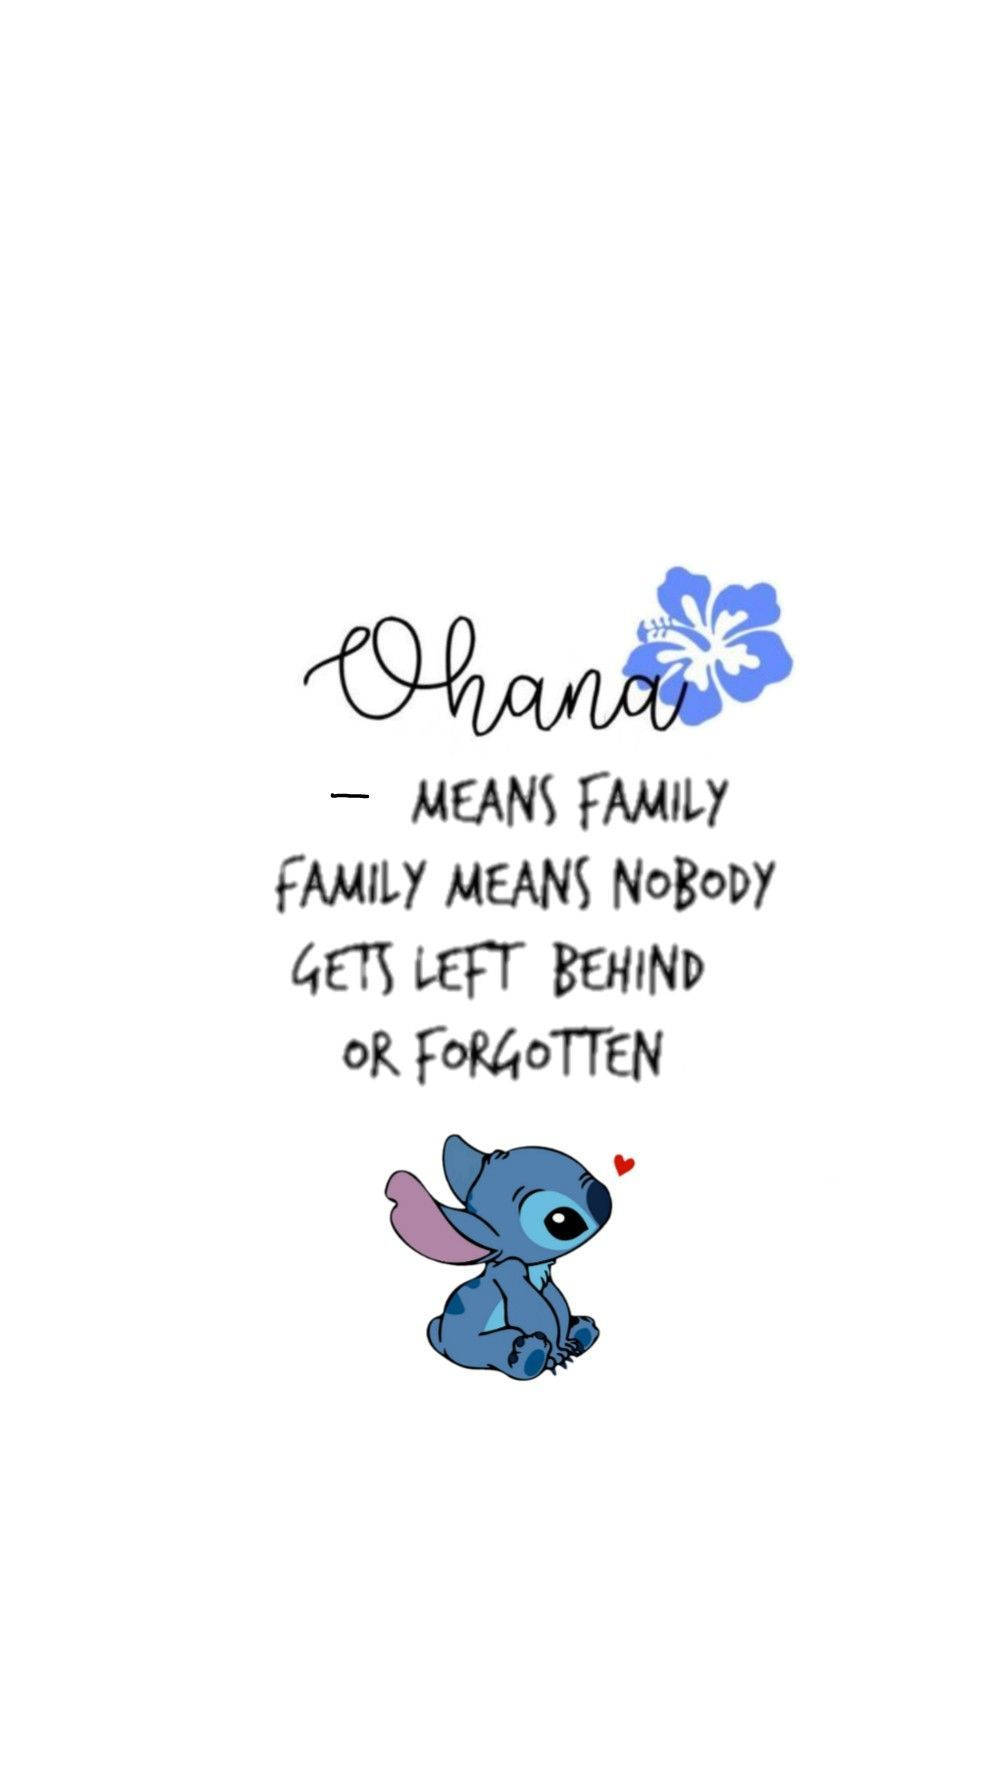 Disney Lilo and Stitch Ohana Means Family Floral